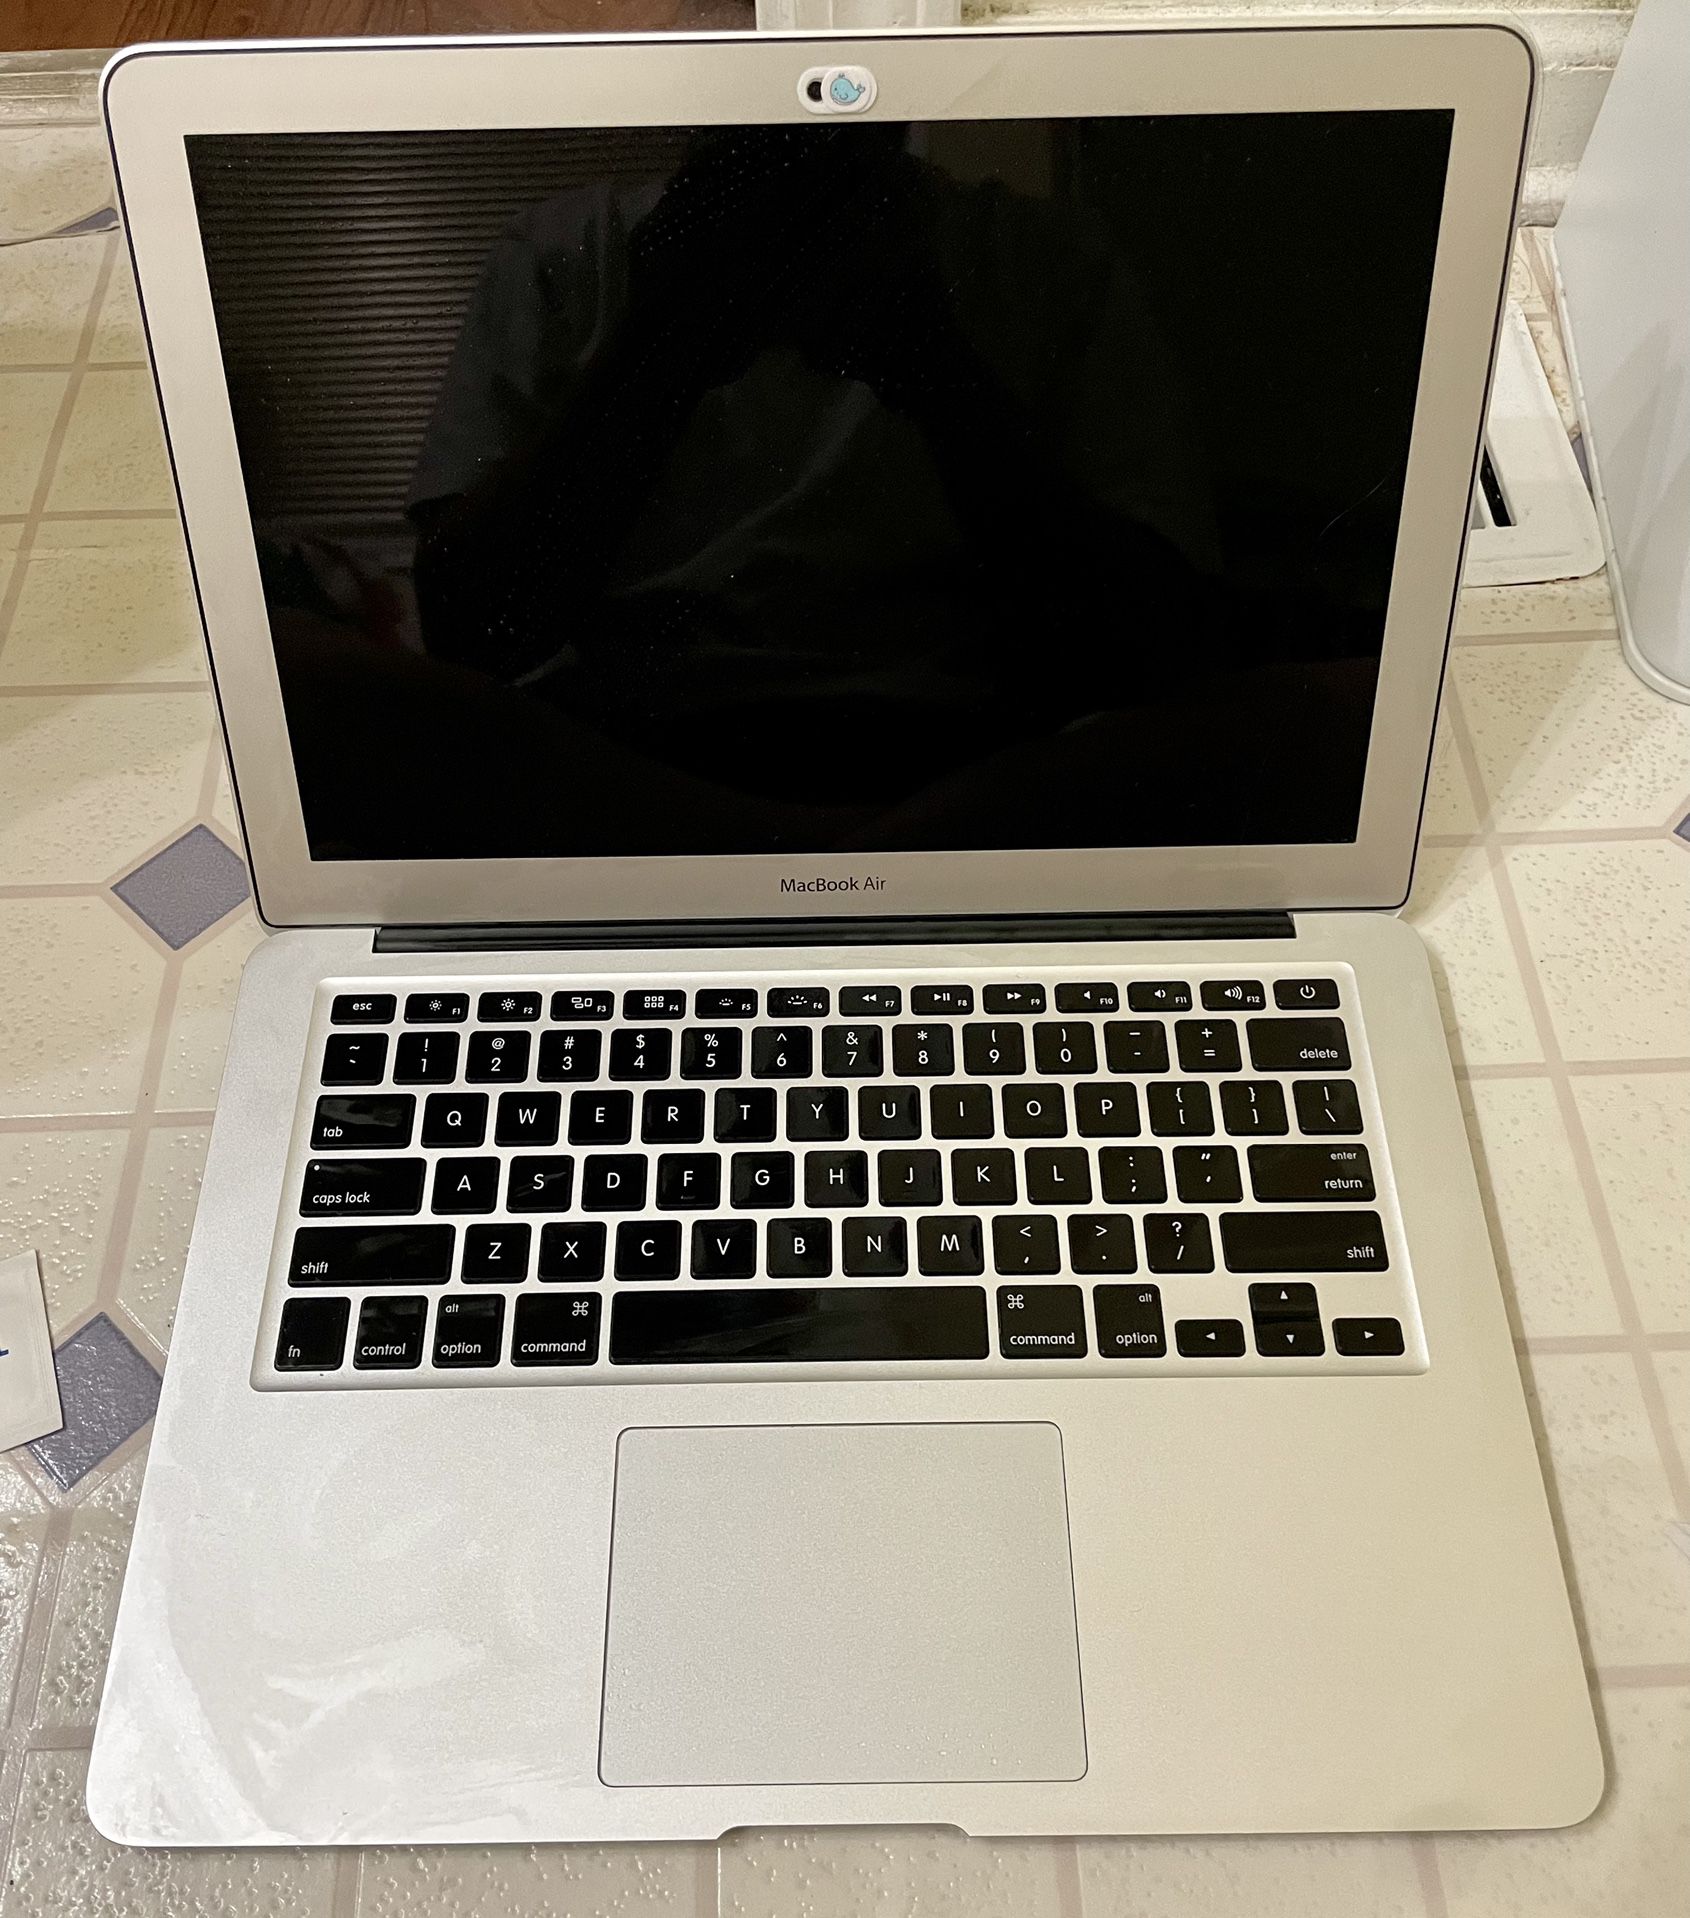 Macbook air 2017 13 inche i5 Ram 8G SSD 128 Gb . Like new, dont scratch. Include charge.